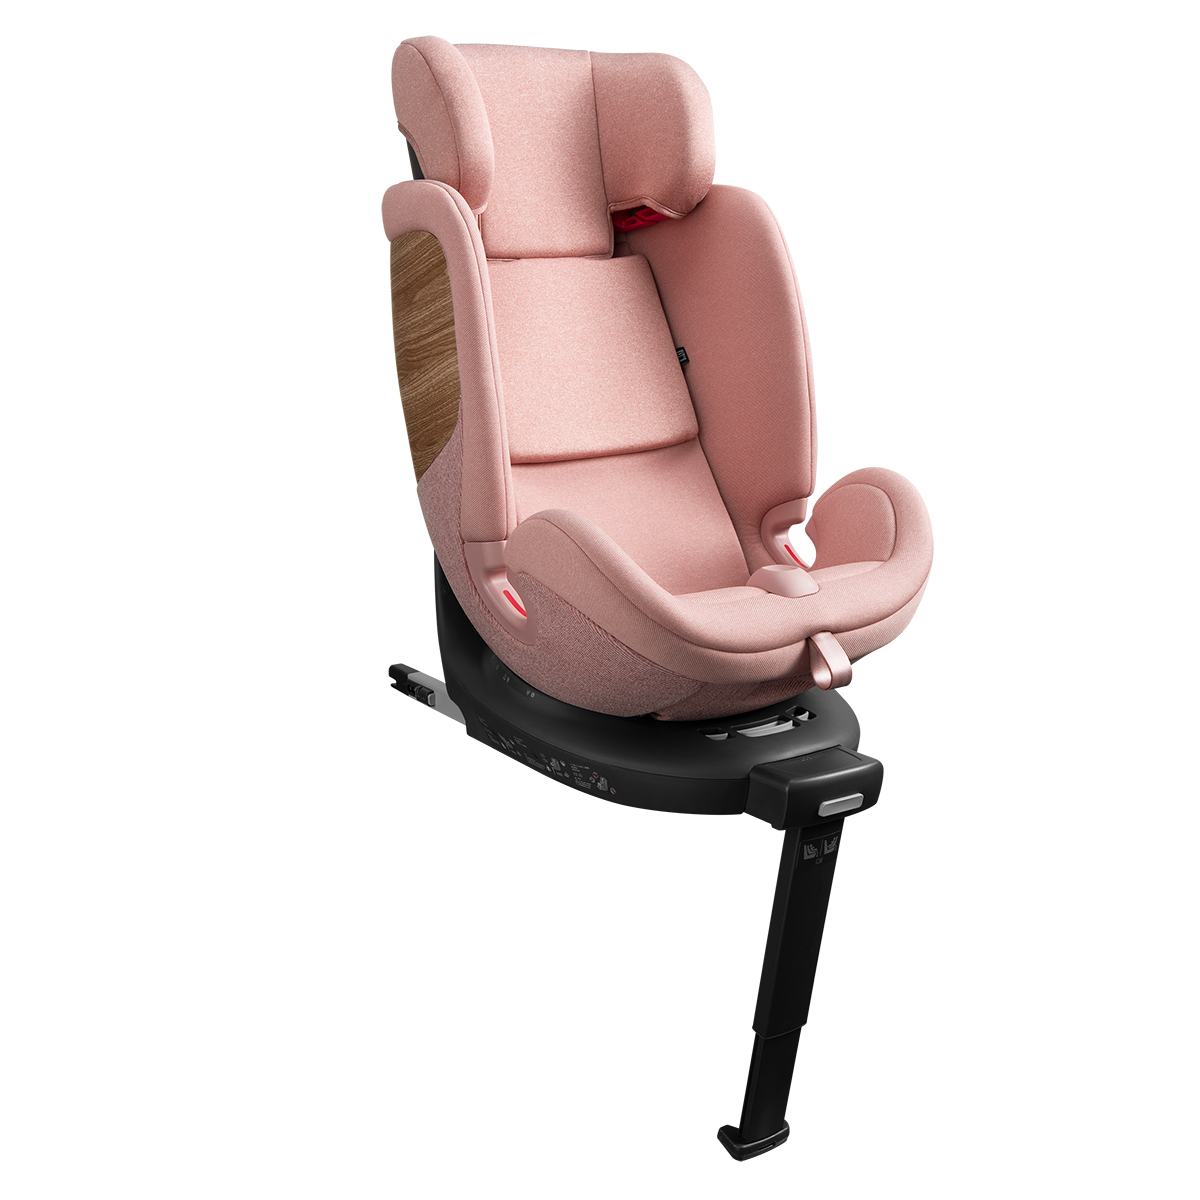 YKO - Maple&Co Child Car Seat - Pink